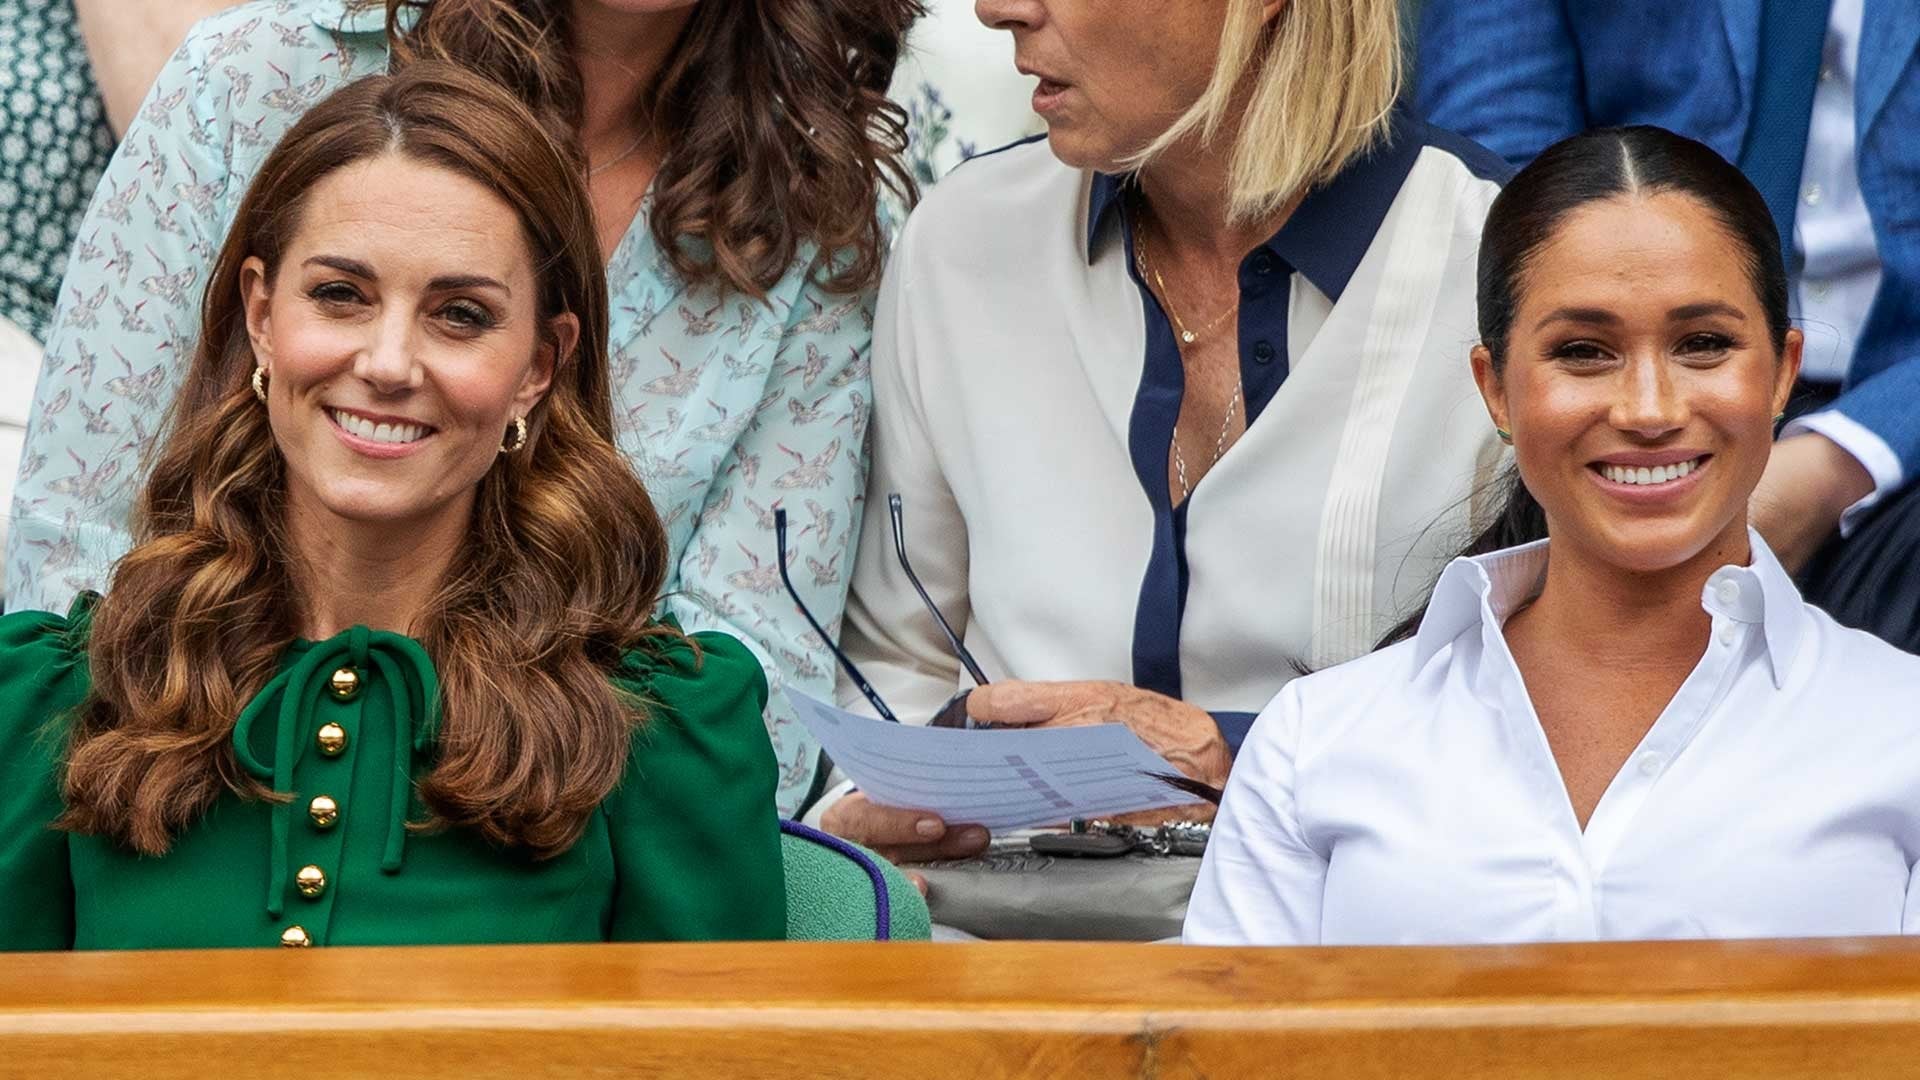 New Details About Meghan Markle and Kate Middleton's Entertainment Tonight